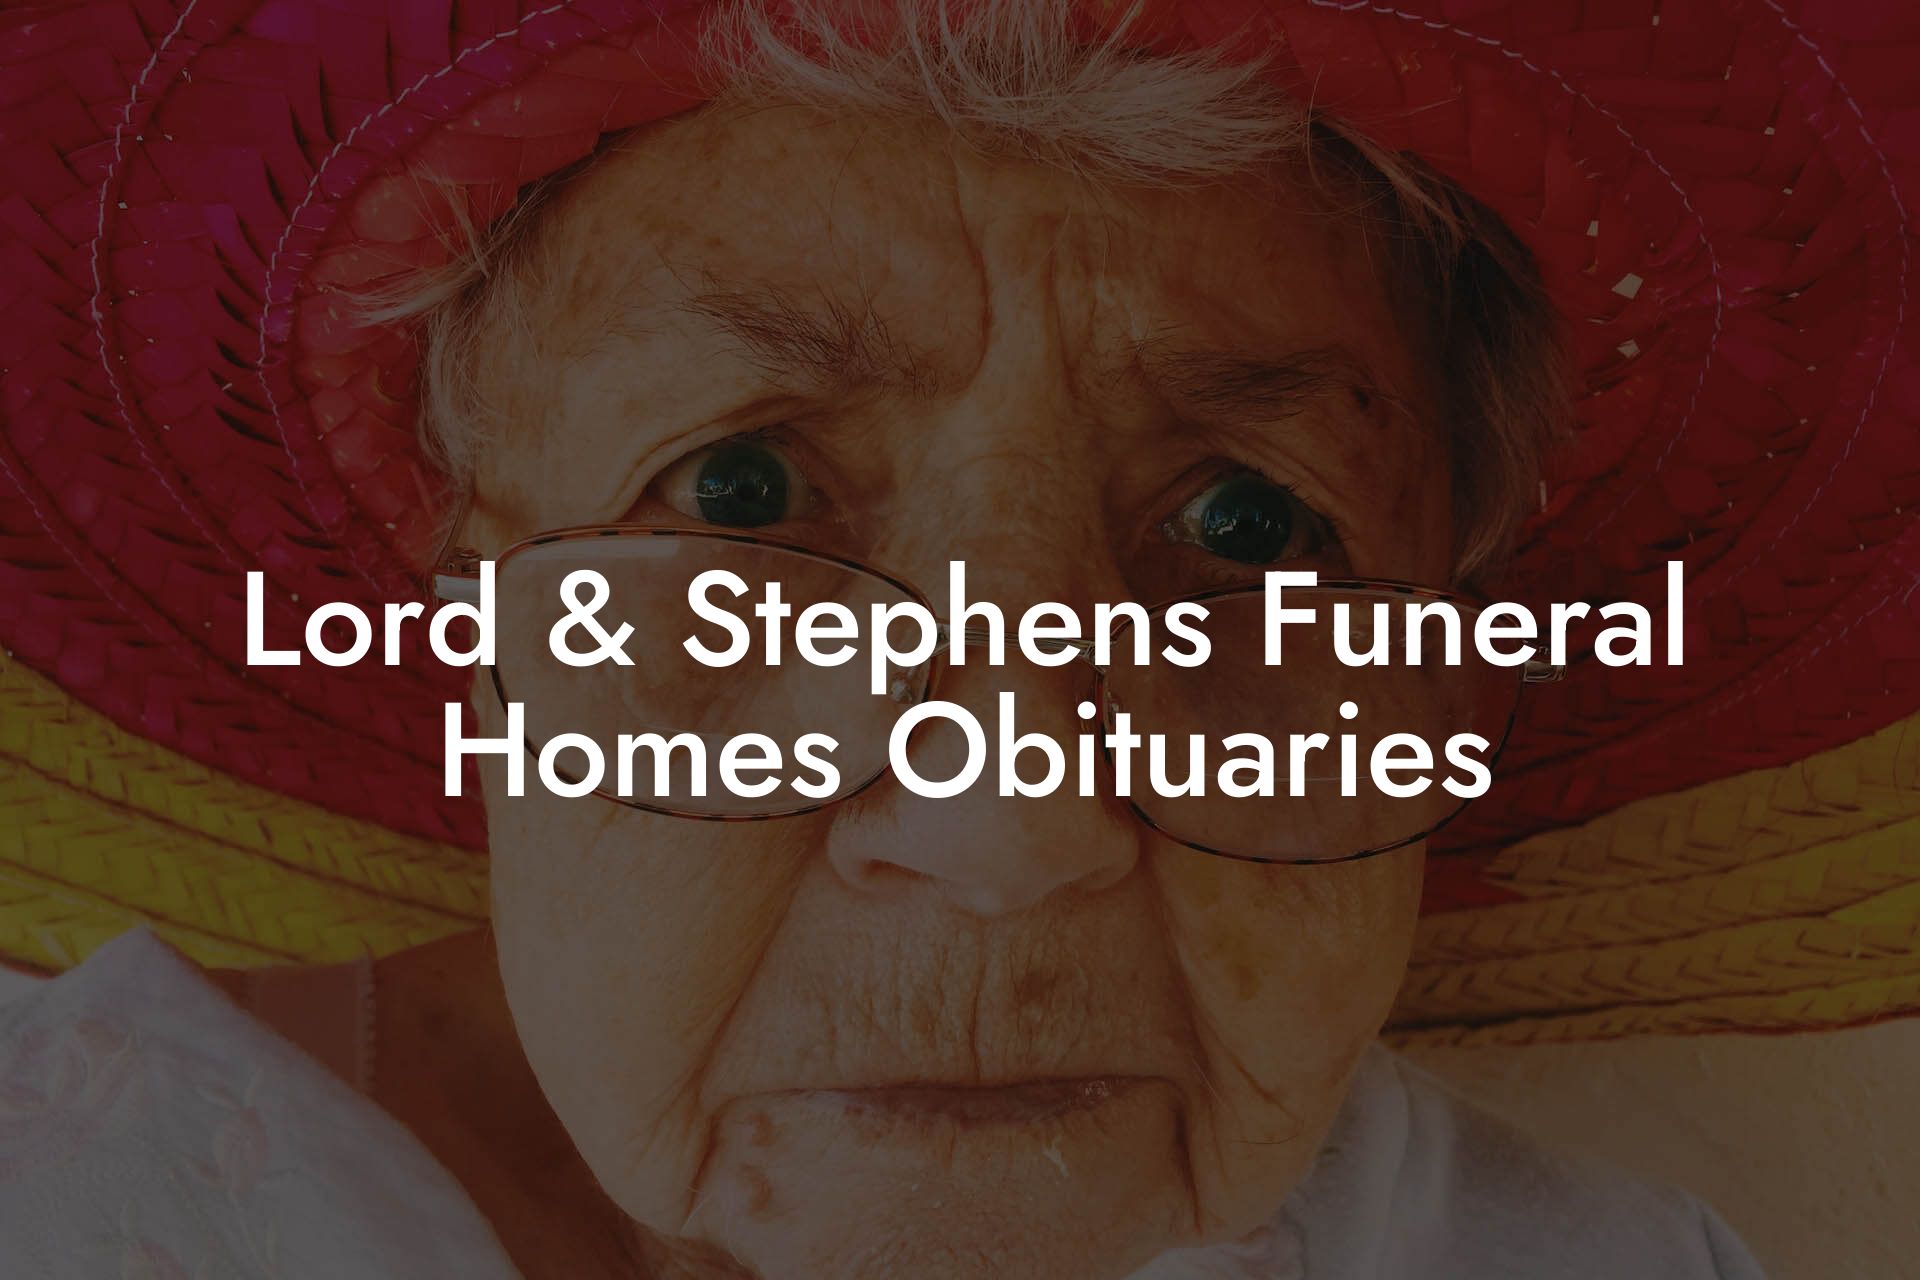 Lord & Stephens Funeral Homes Obituaries